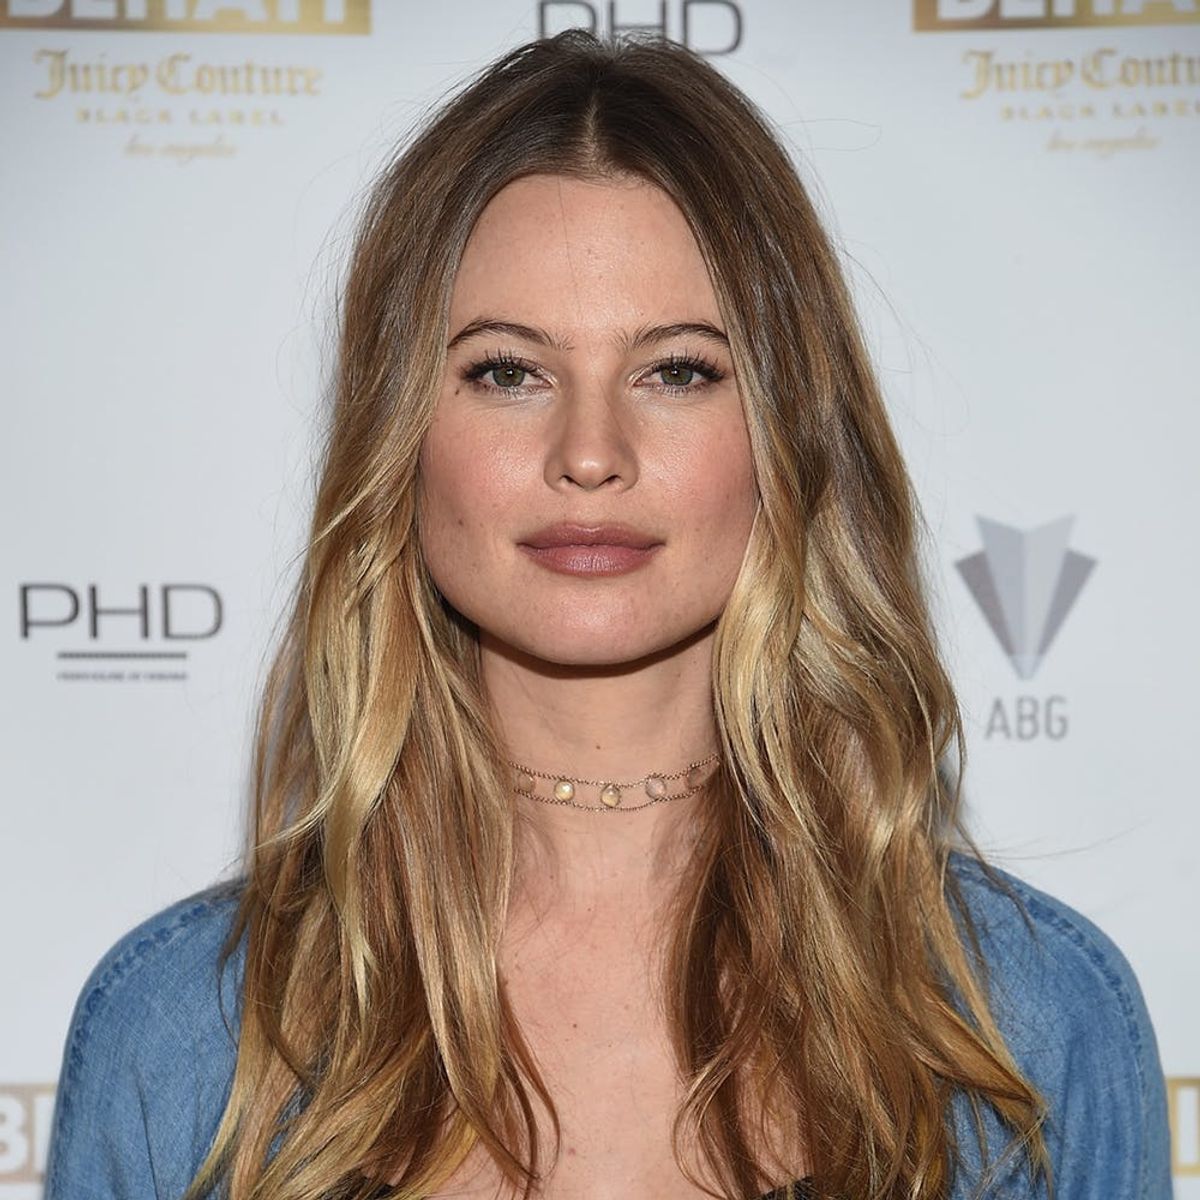 Behati Prinsloo and Daughter’s Mommy-and-Me Anklets Are Stinkin’ Adorable